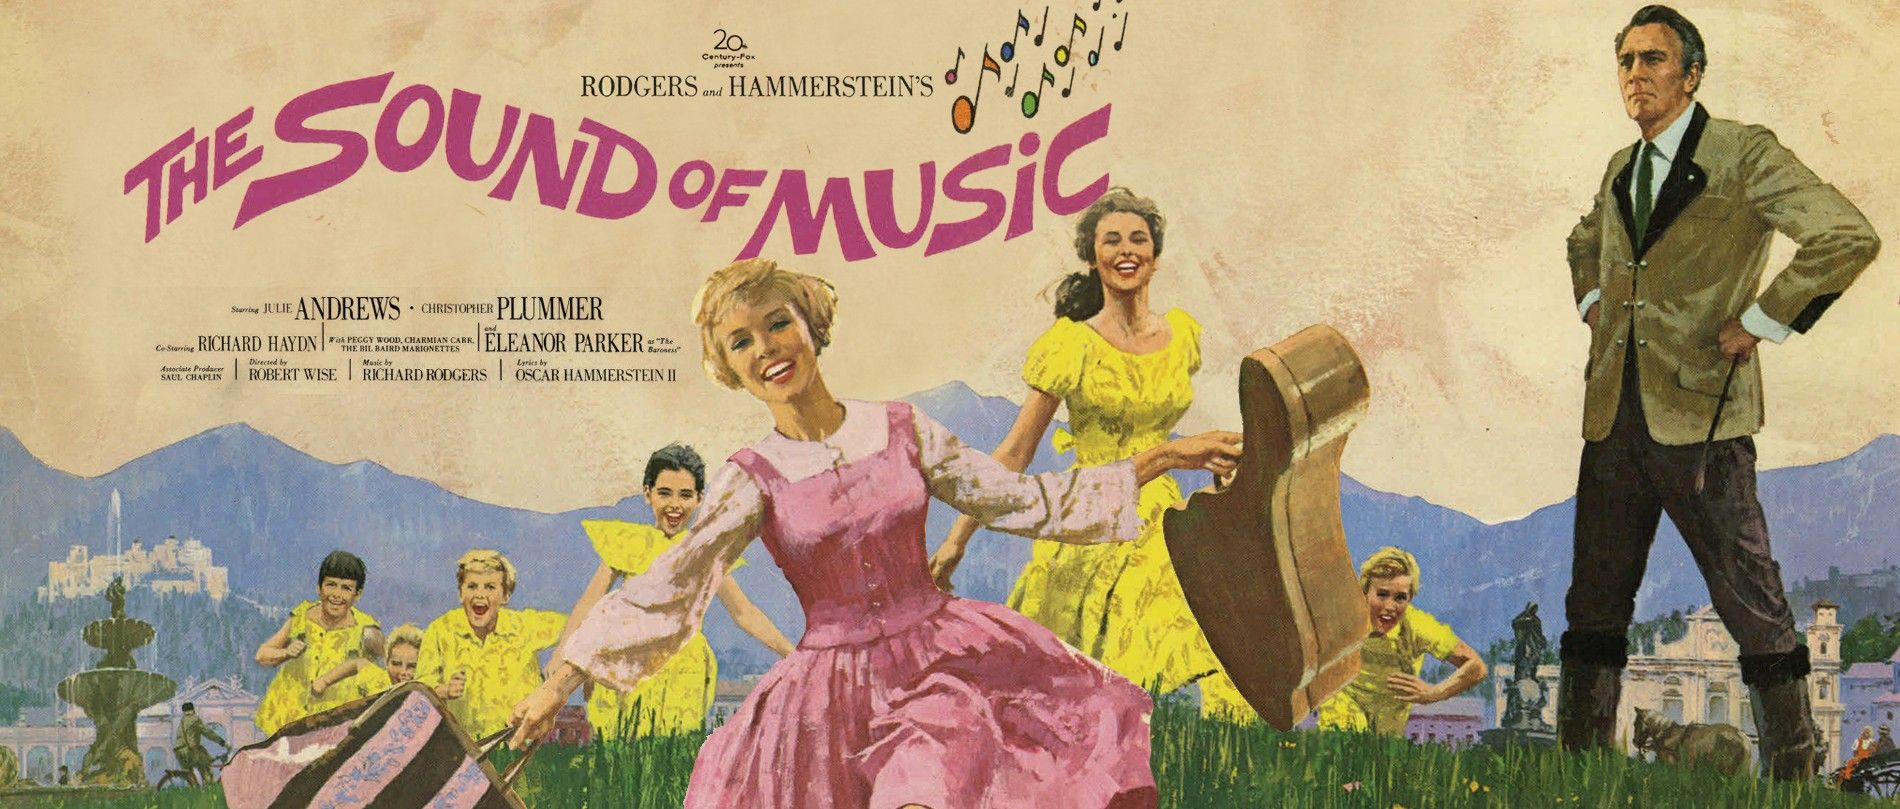 The Sound Of Music wallpaper, Movie, HQ The Sound Of Music pictureK Wallpaper 2019